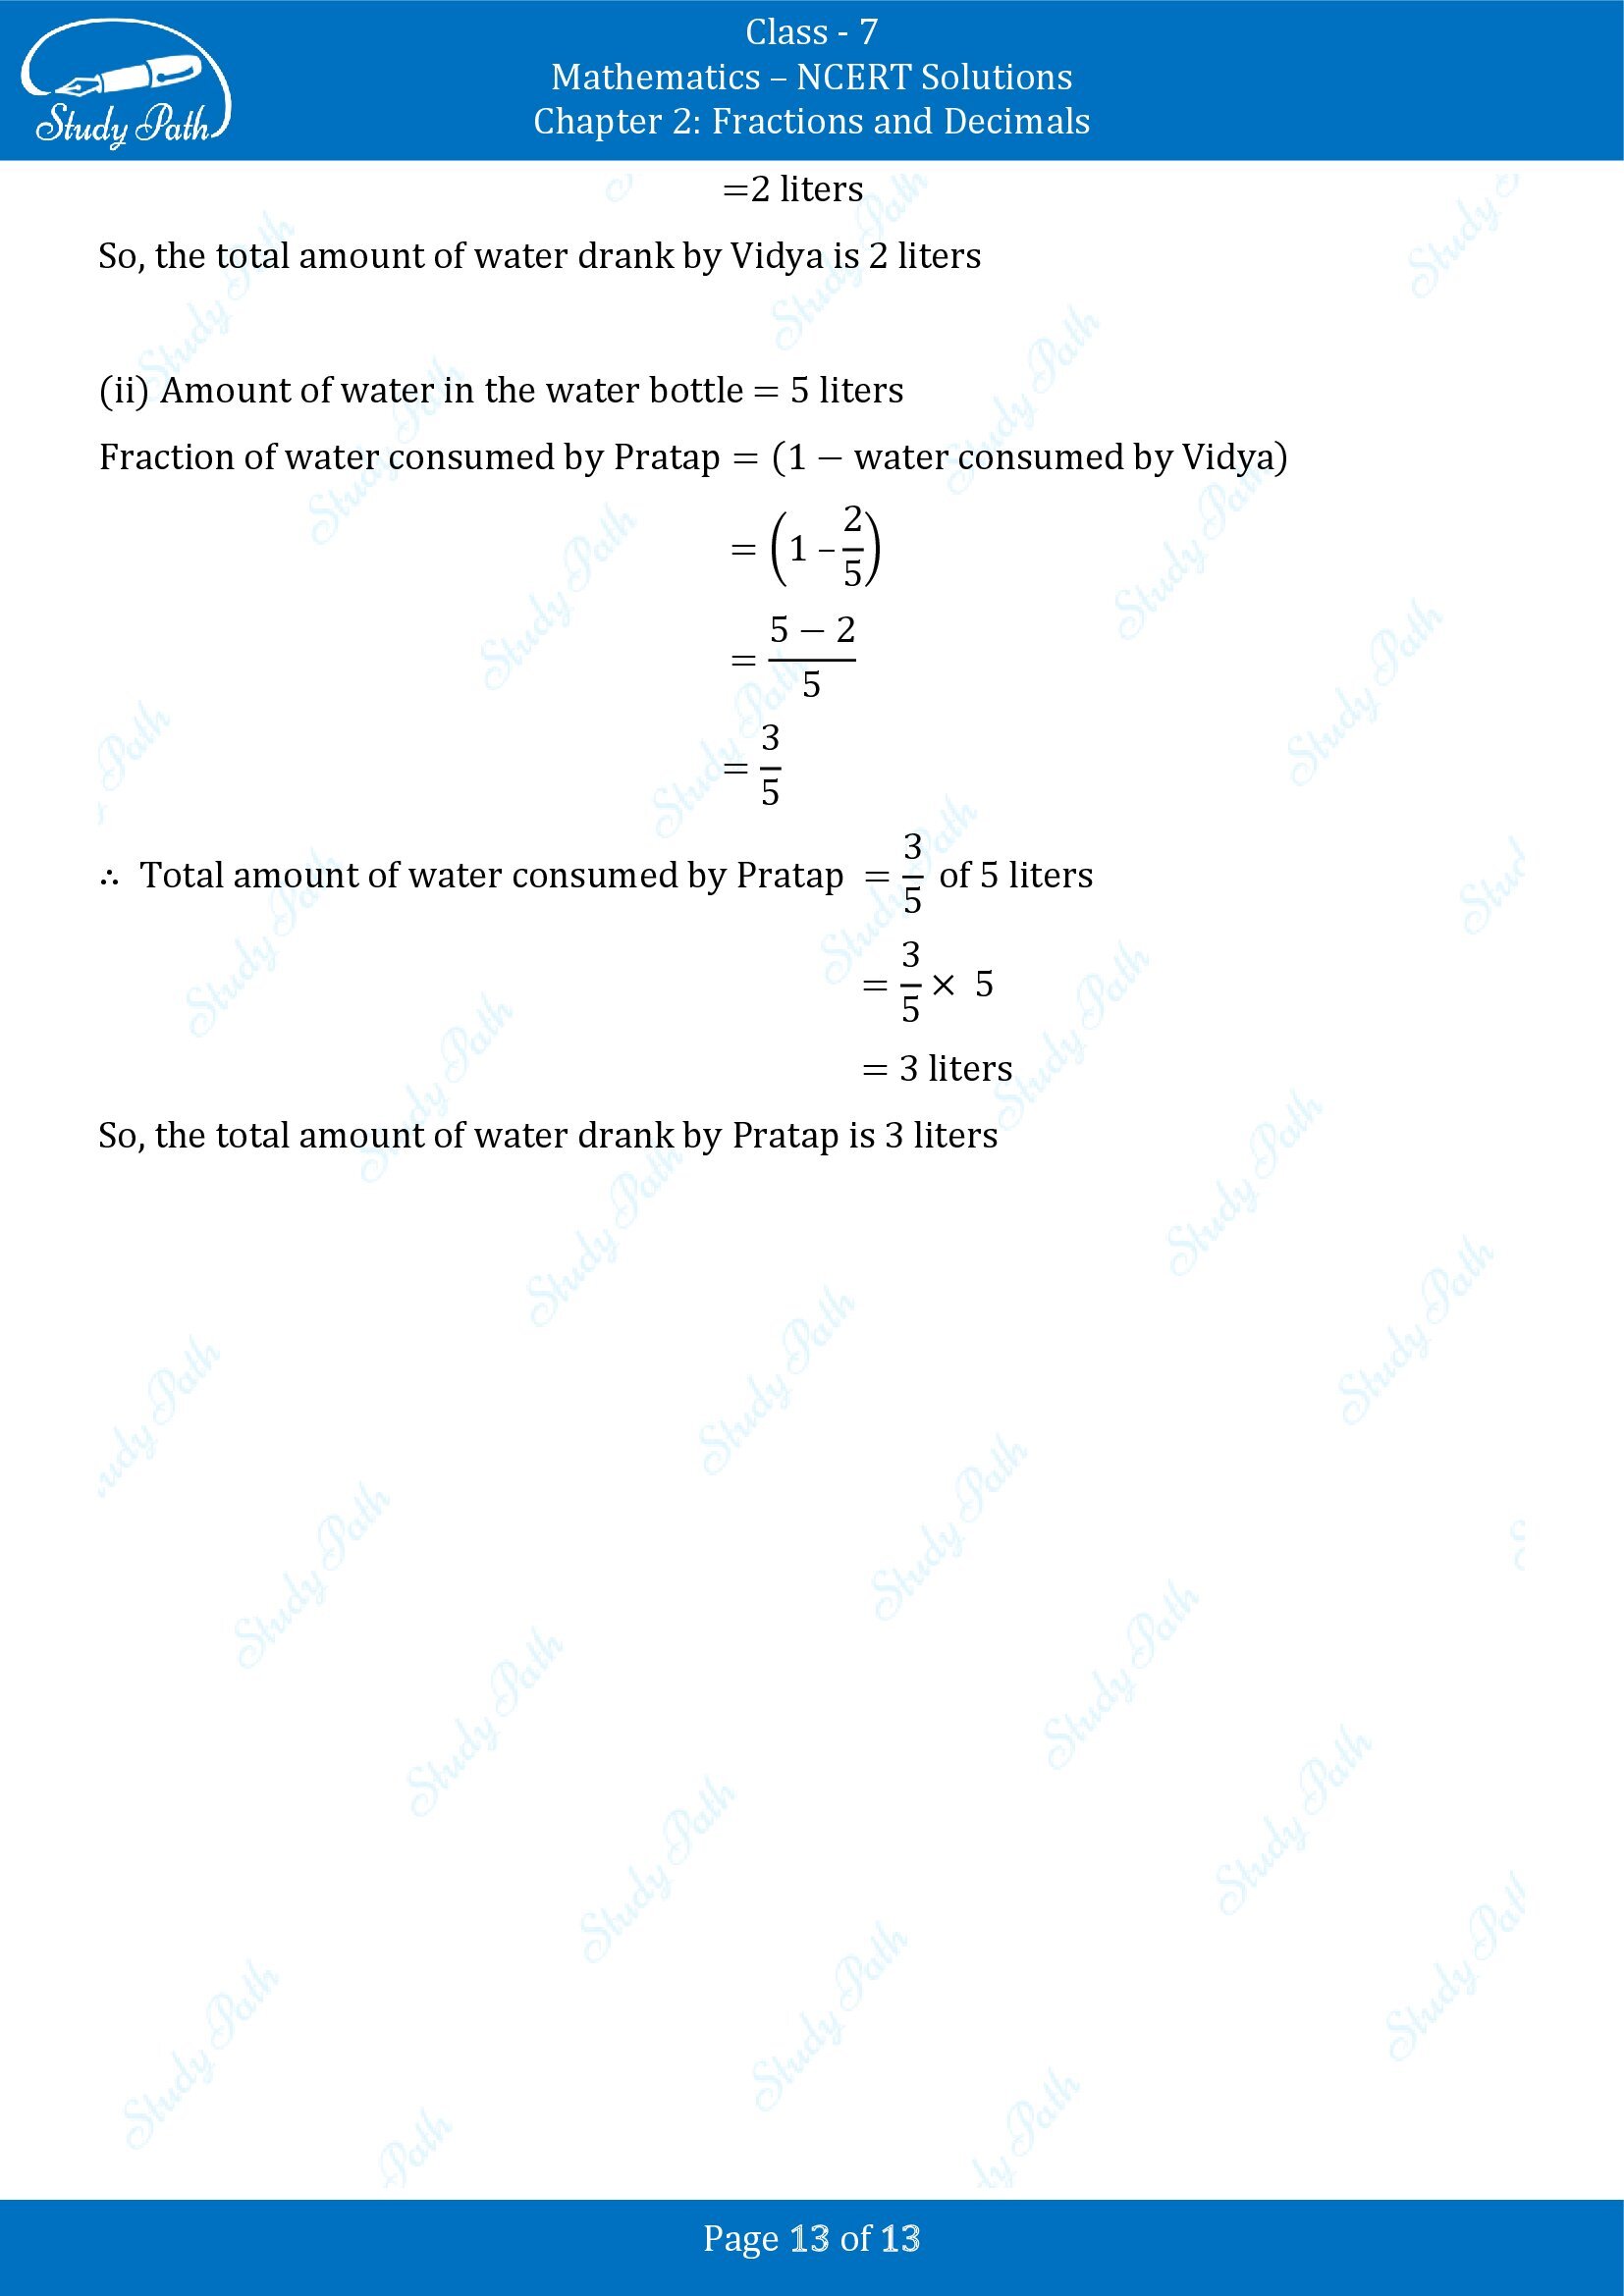 NCERT Solutions for Class 7 Maths Chapter 2 Fractions and Decimals Exercise 2.2 00013